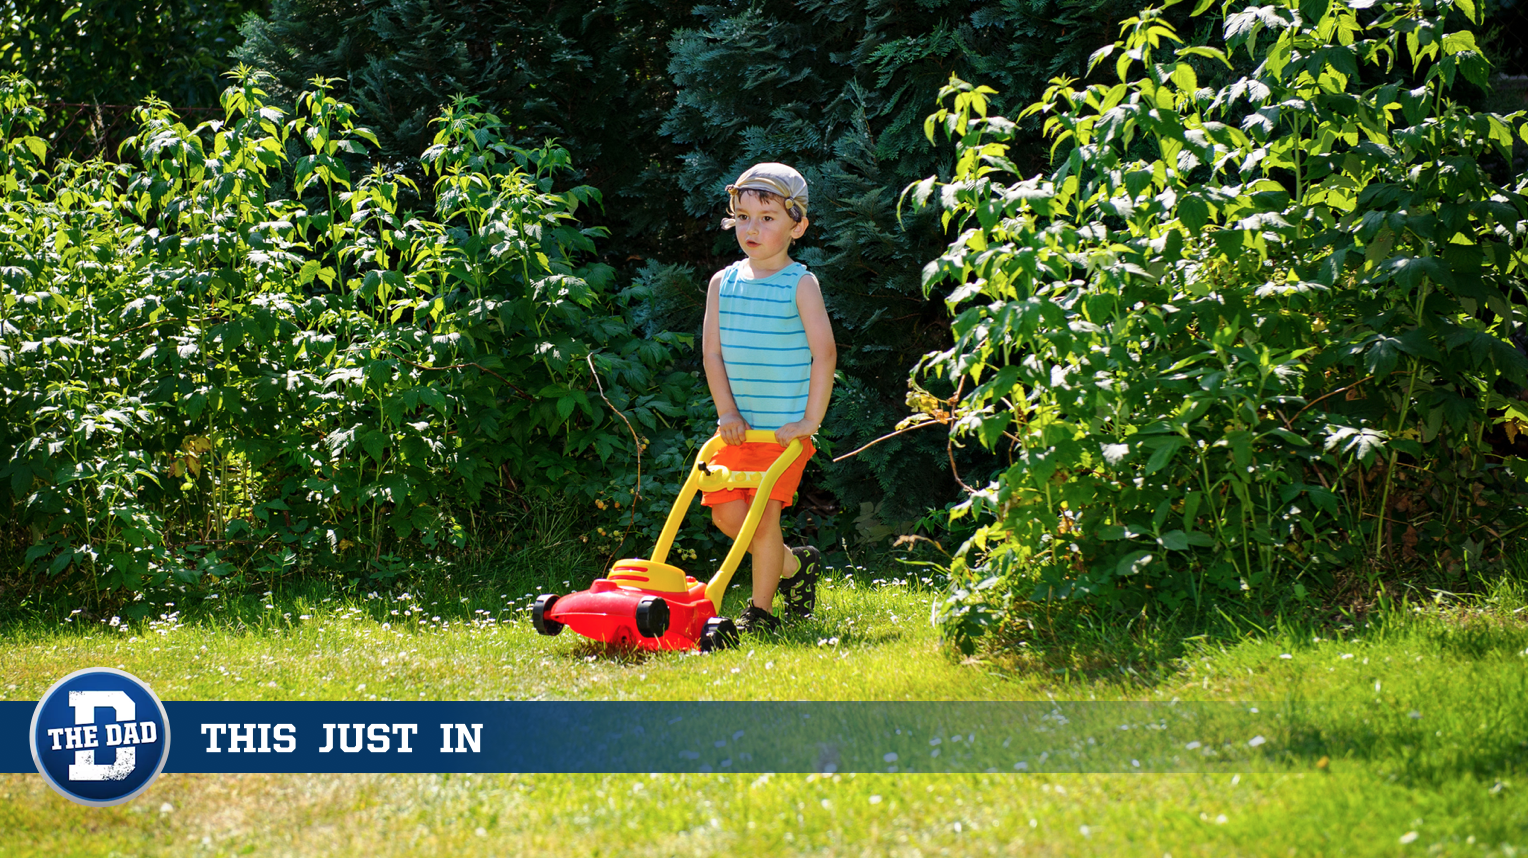 Dad Buys Kid Toy Mower to Teach Valuable Skill of Avoiding Family